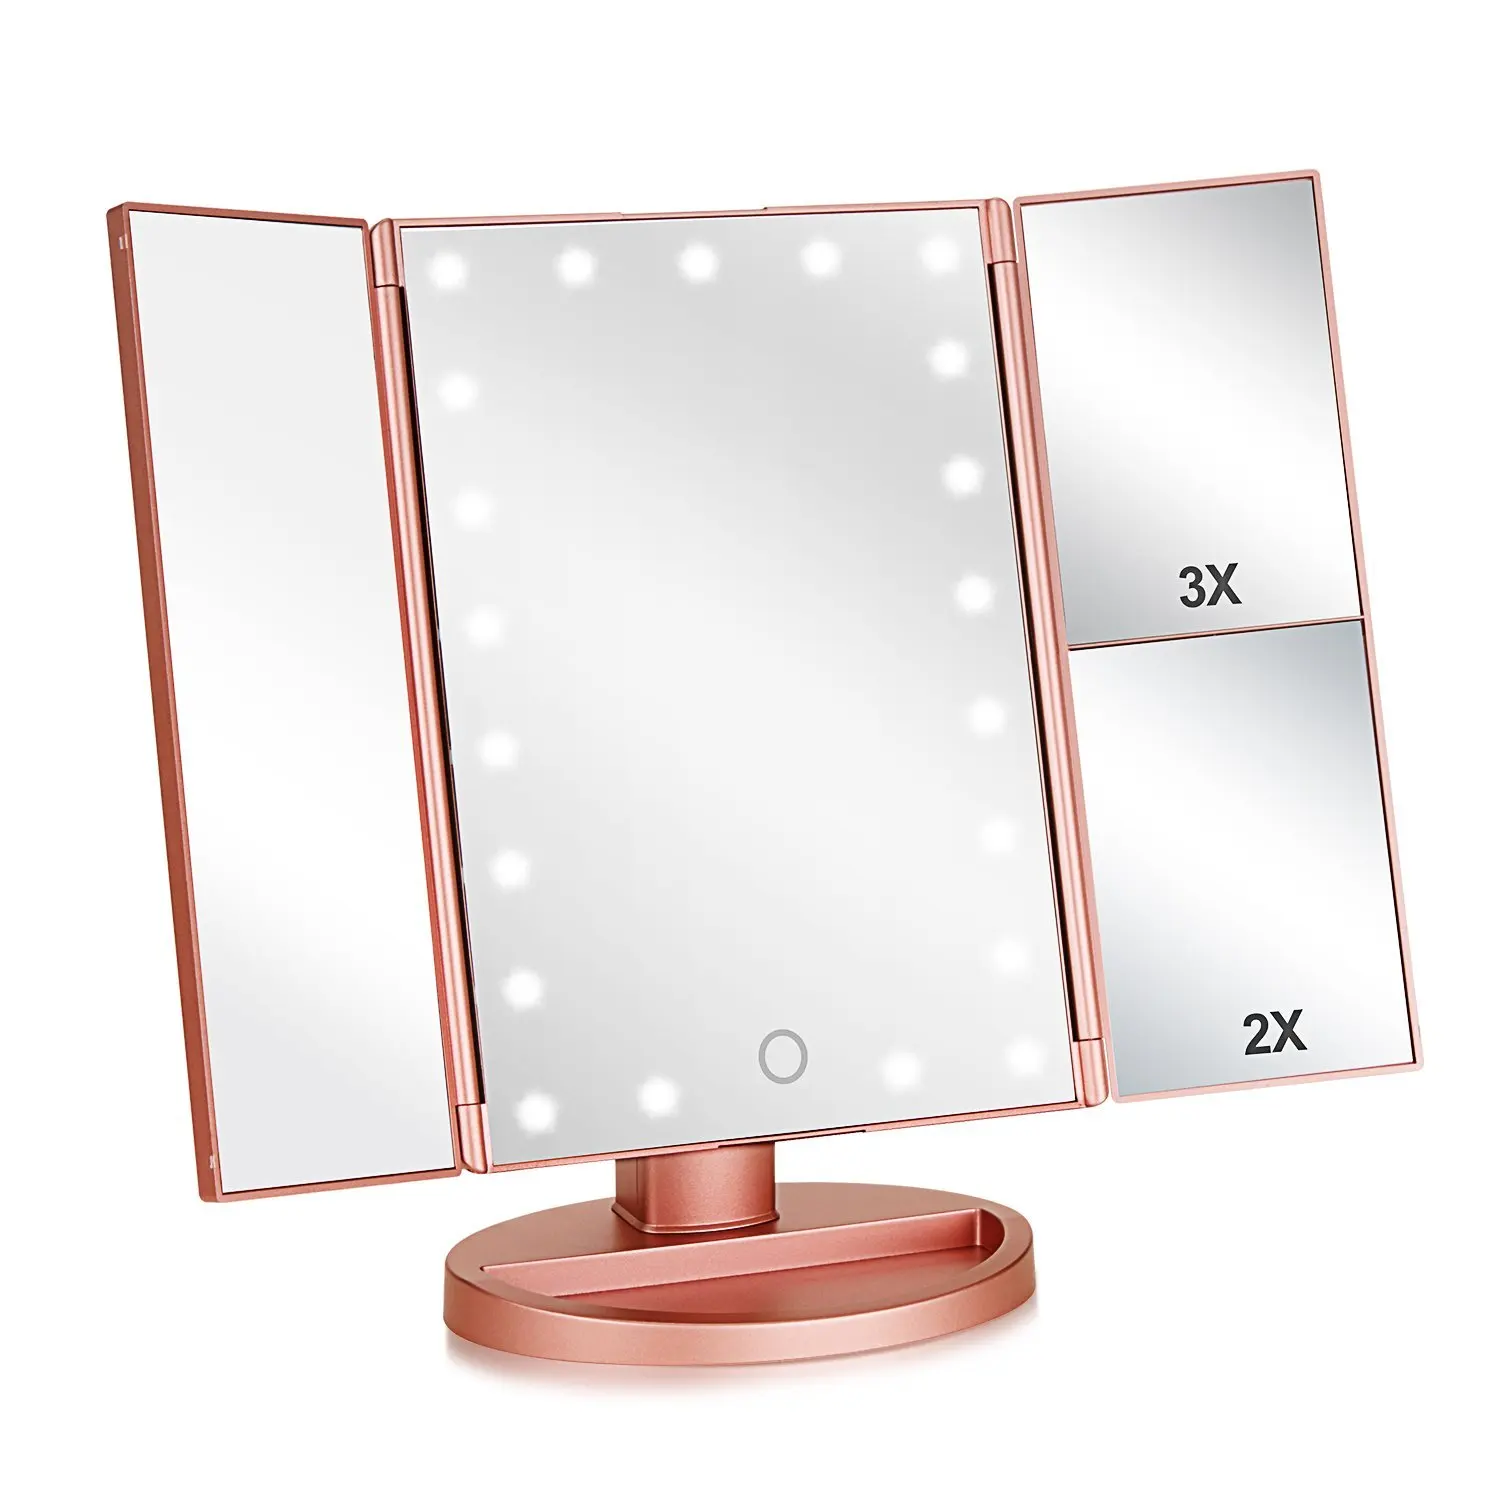 

OMG Cosmetic LED Mirror Makeup OEM Top Sale Trifold Vanity Lighted USB Rechargeable Table Top Make Up Mirror, Black, white and pink